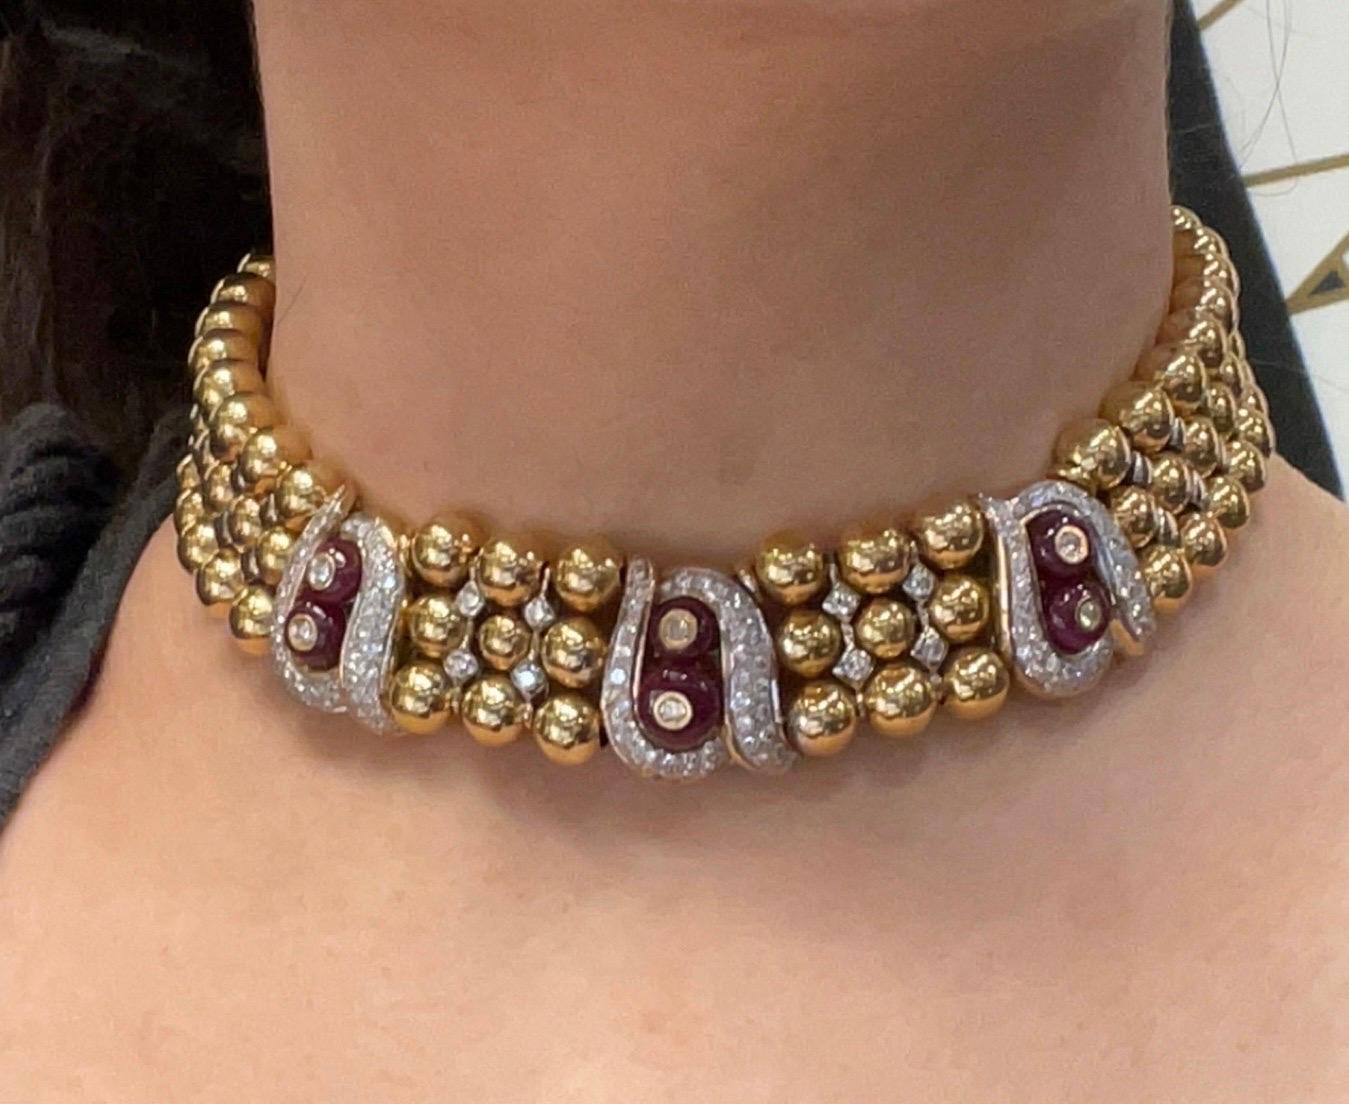 Ruby and Diamond Choker by Elan

A yellow gold bead chocker with 6 ruby beads and 143 round cut diamonds.

Approximate combined ruby weight: 13.00 carats
Approximate combined diamond weight: 3.48 carats
Approximate Length: 12